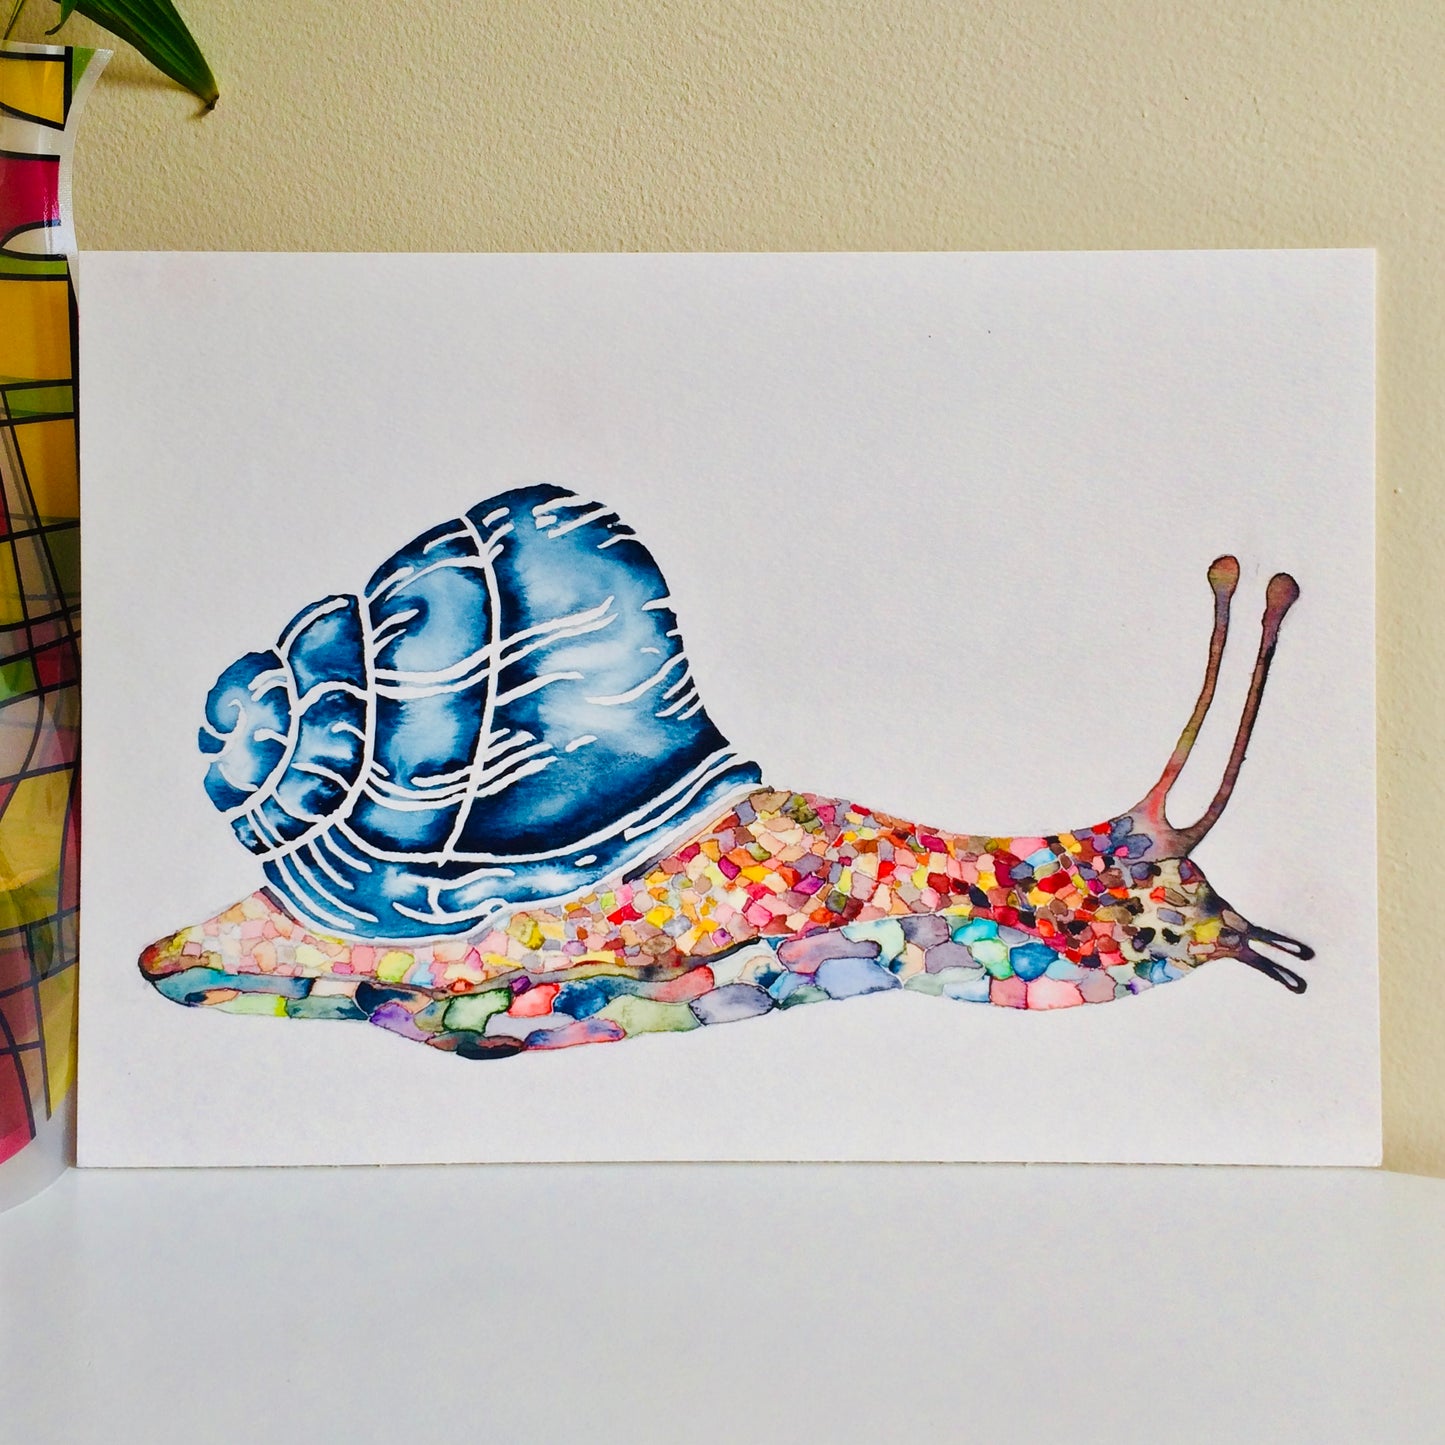 Snail Framed Watercolour Painting